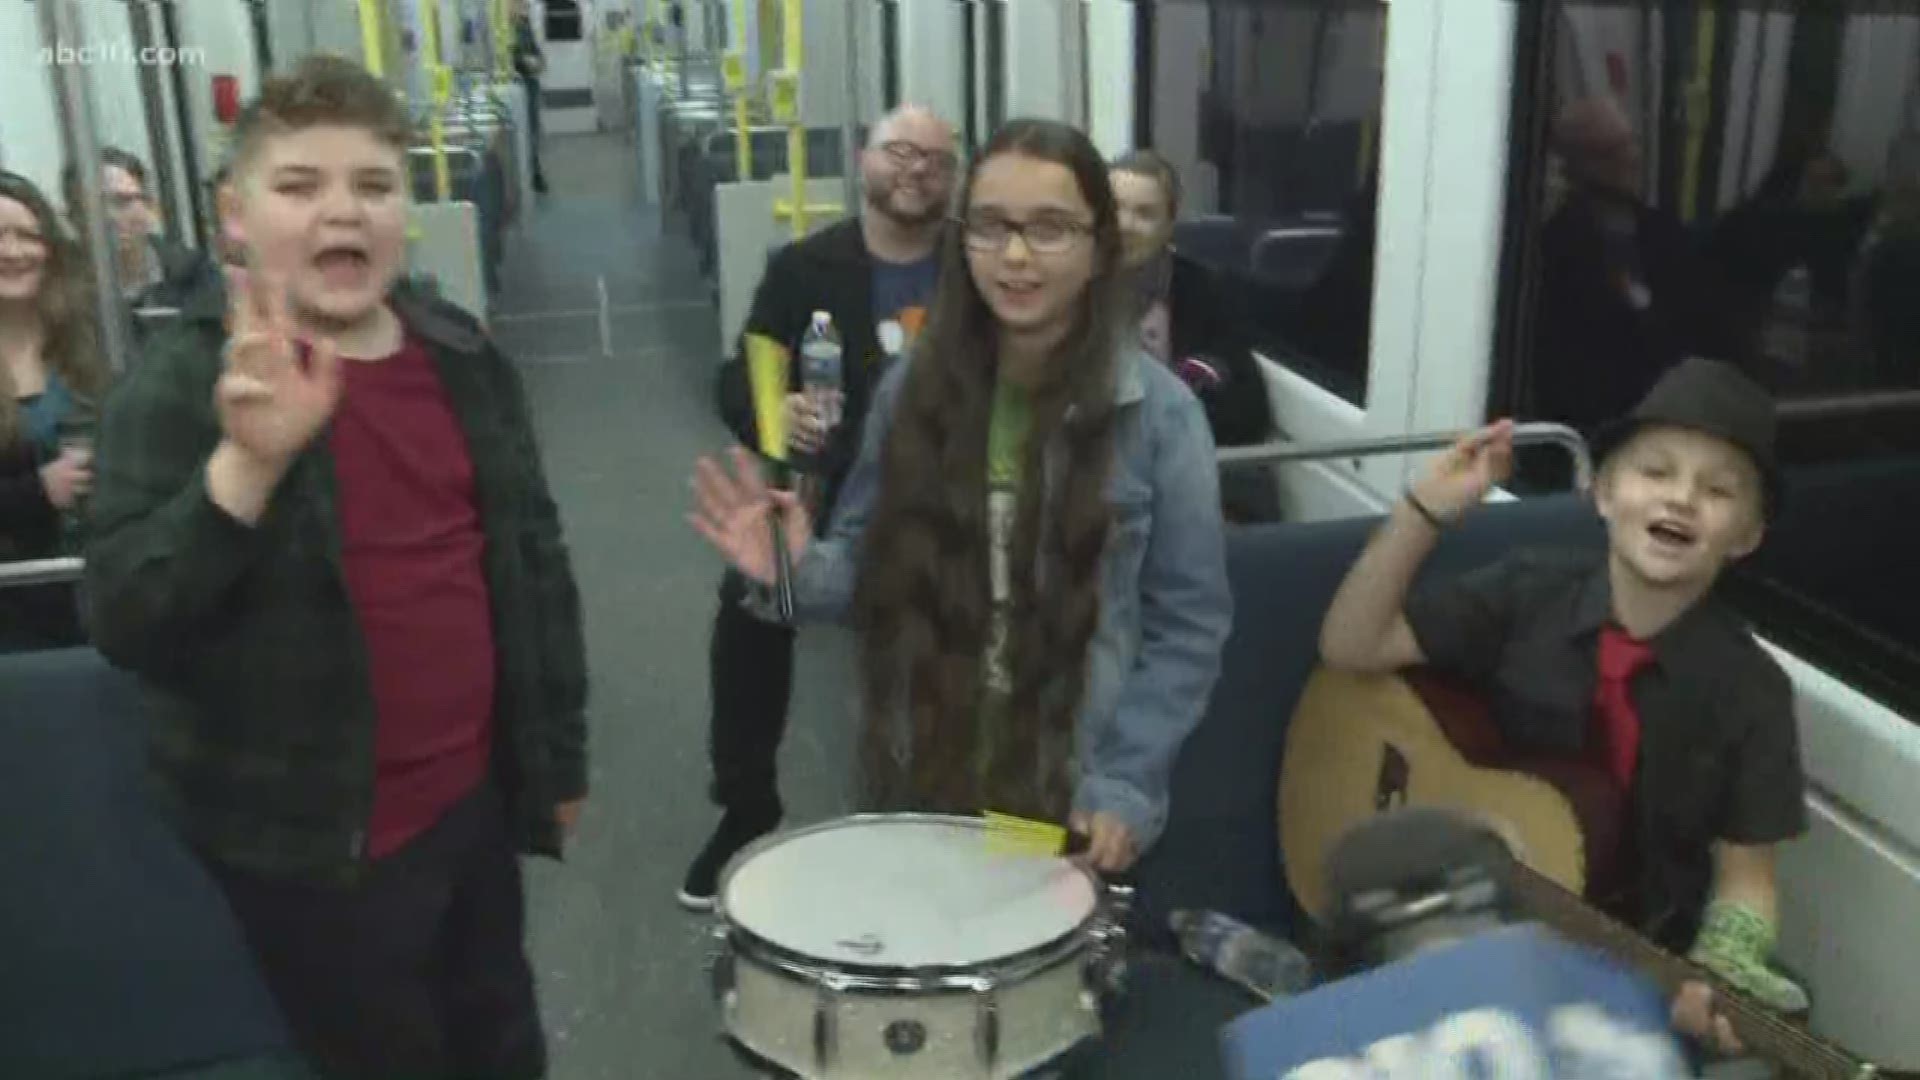 Mark S. Allen is doing Mark S. Allen things on a light rail with The Rockstar Kids Band.